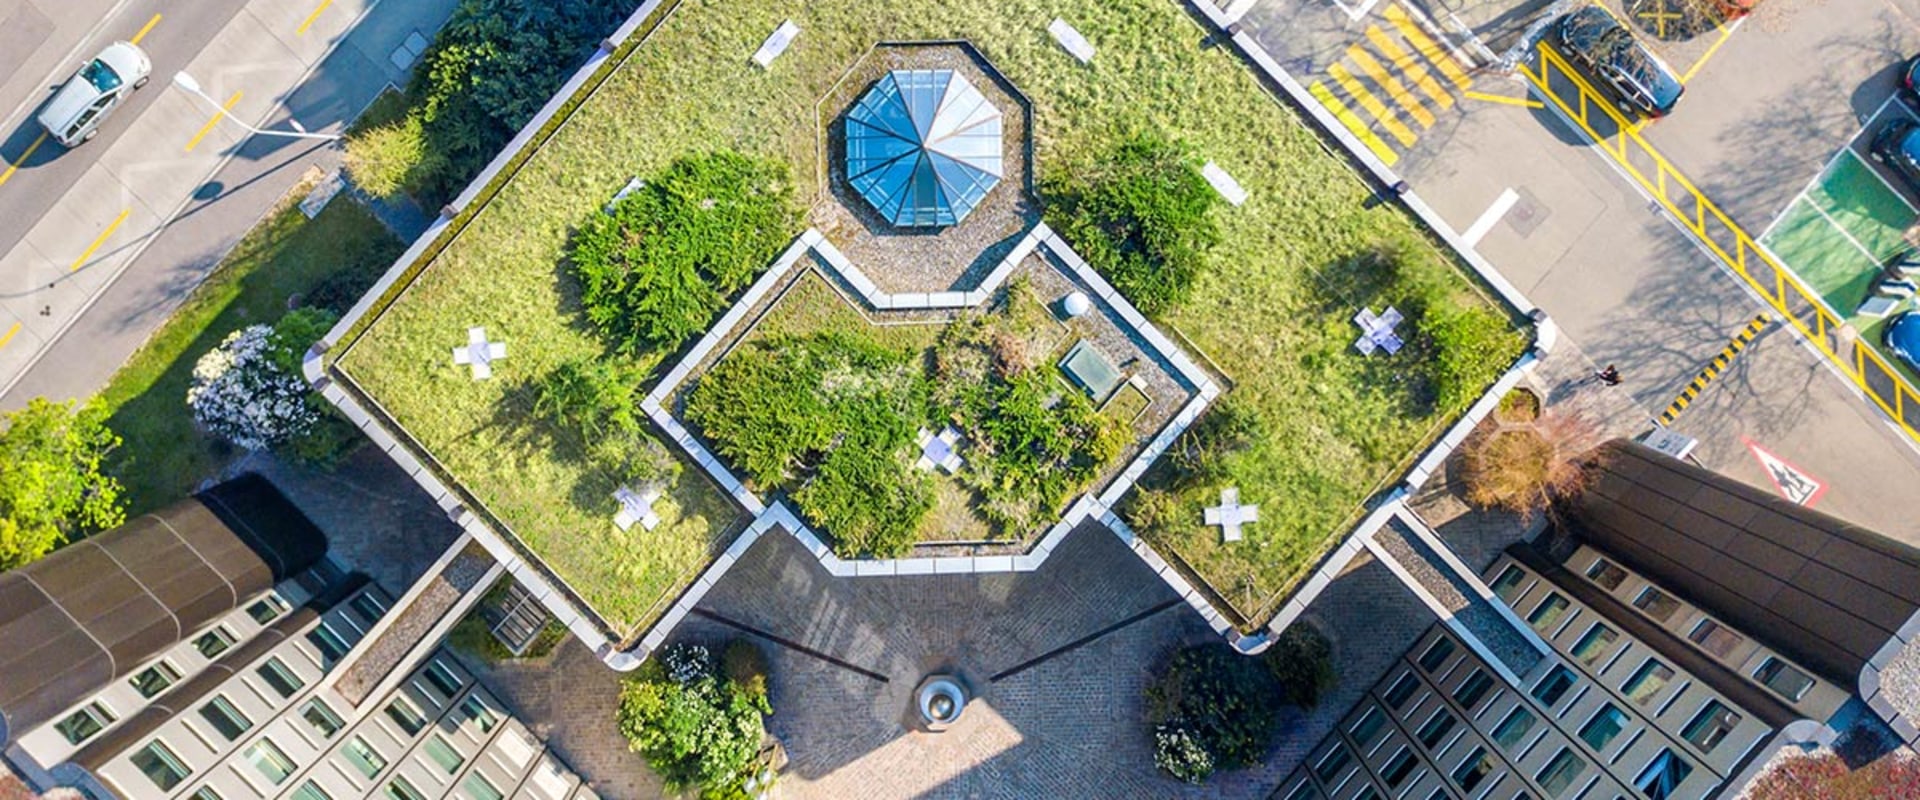 What are the concerns with green roofs?